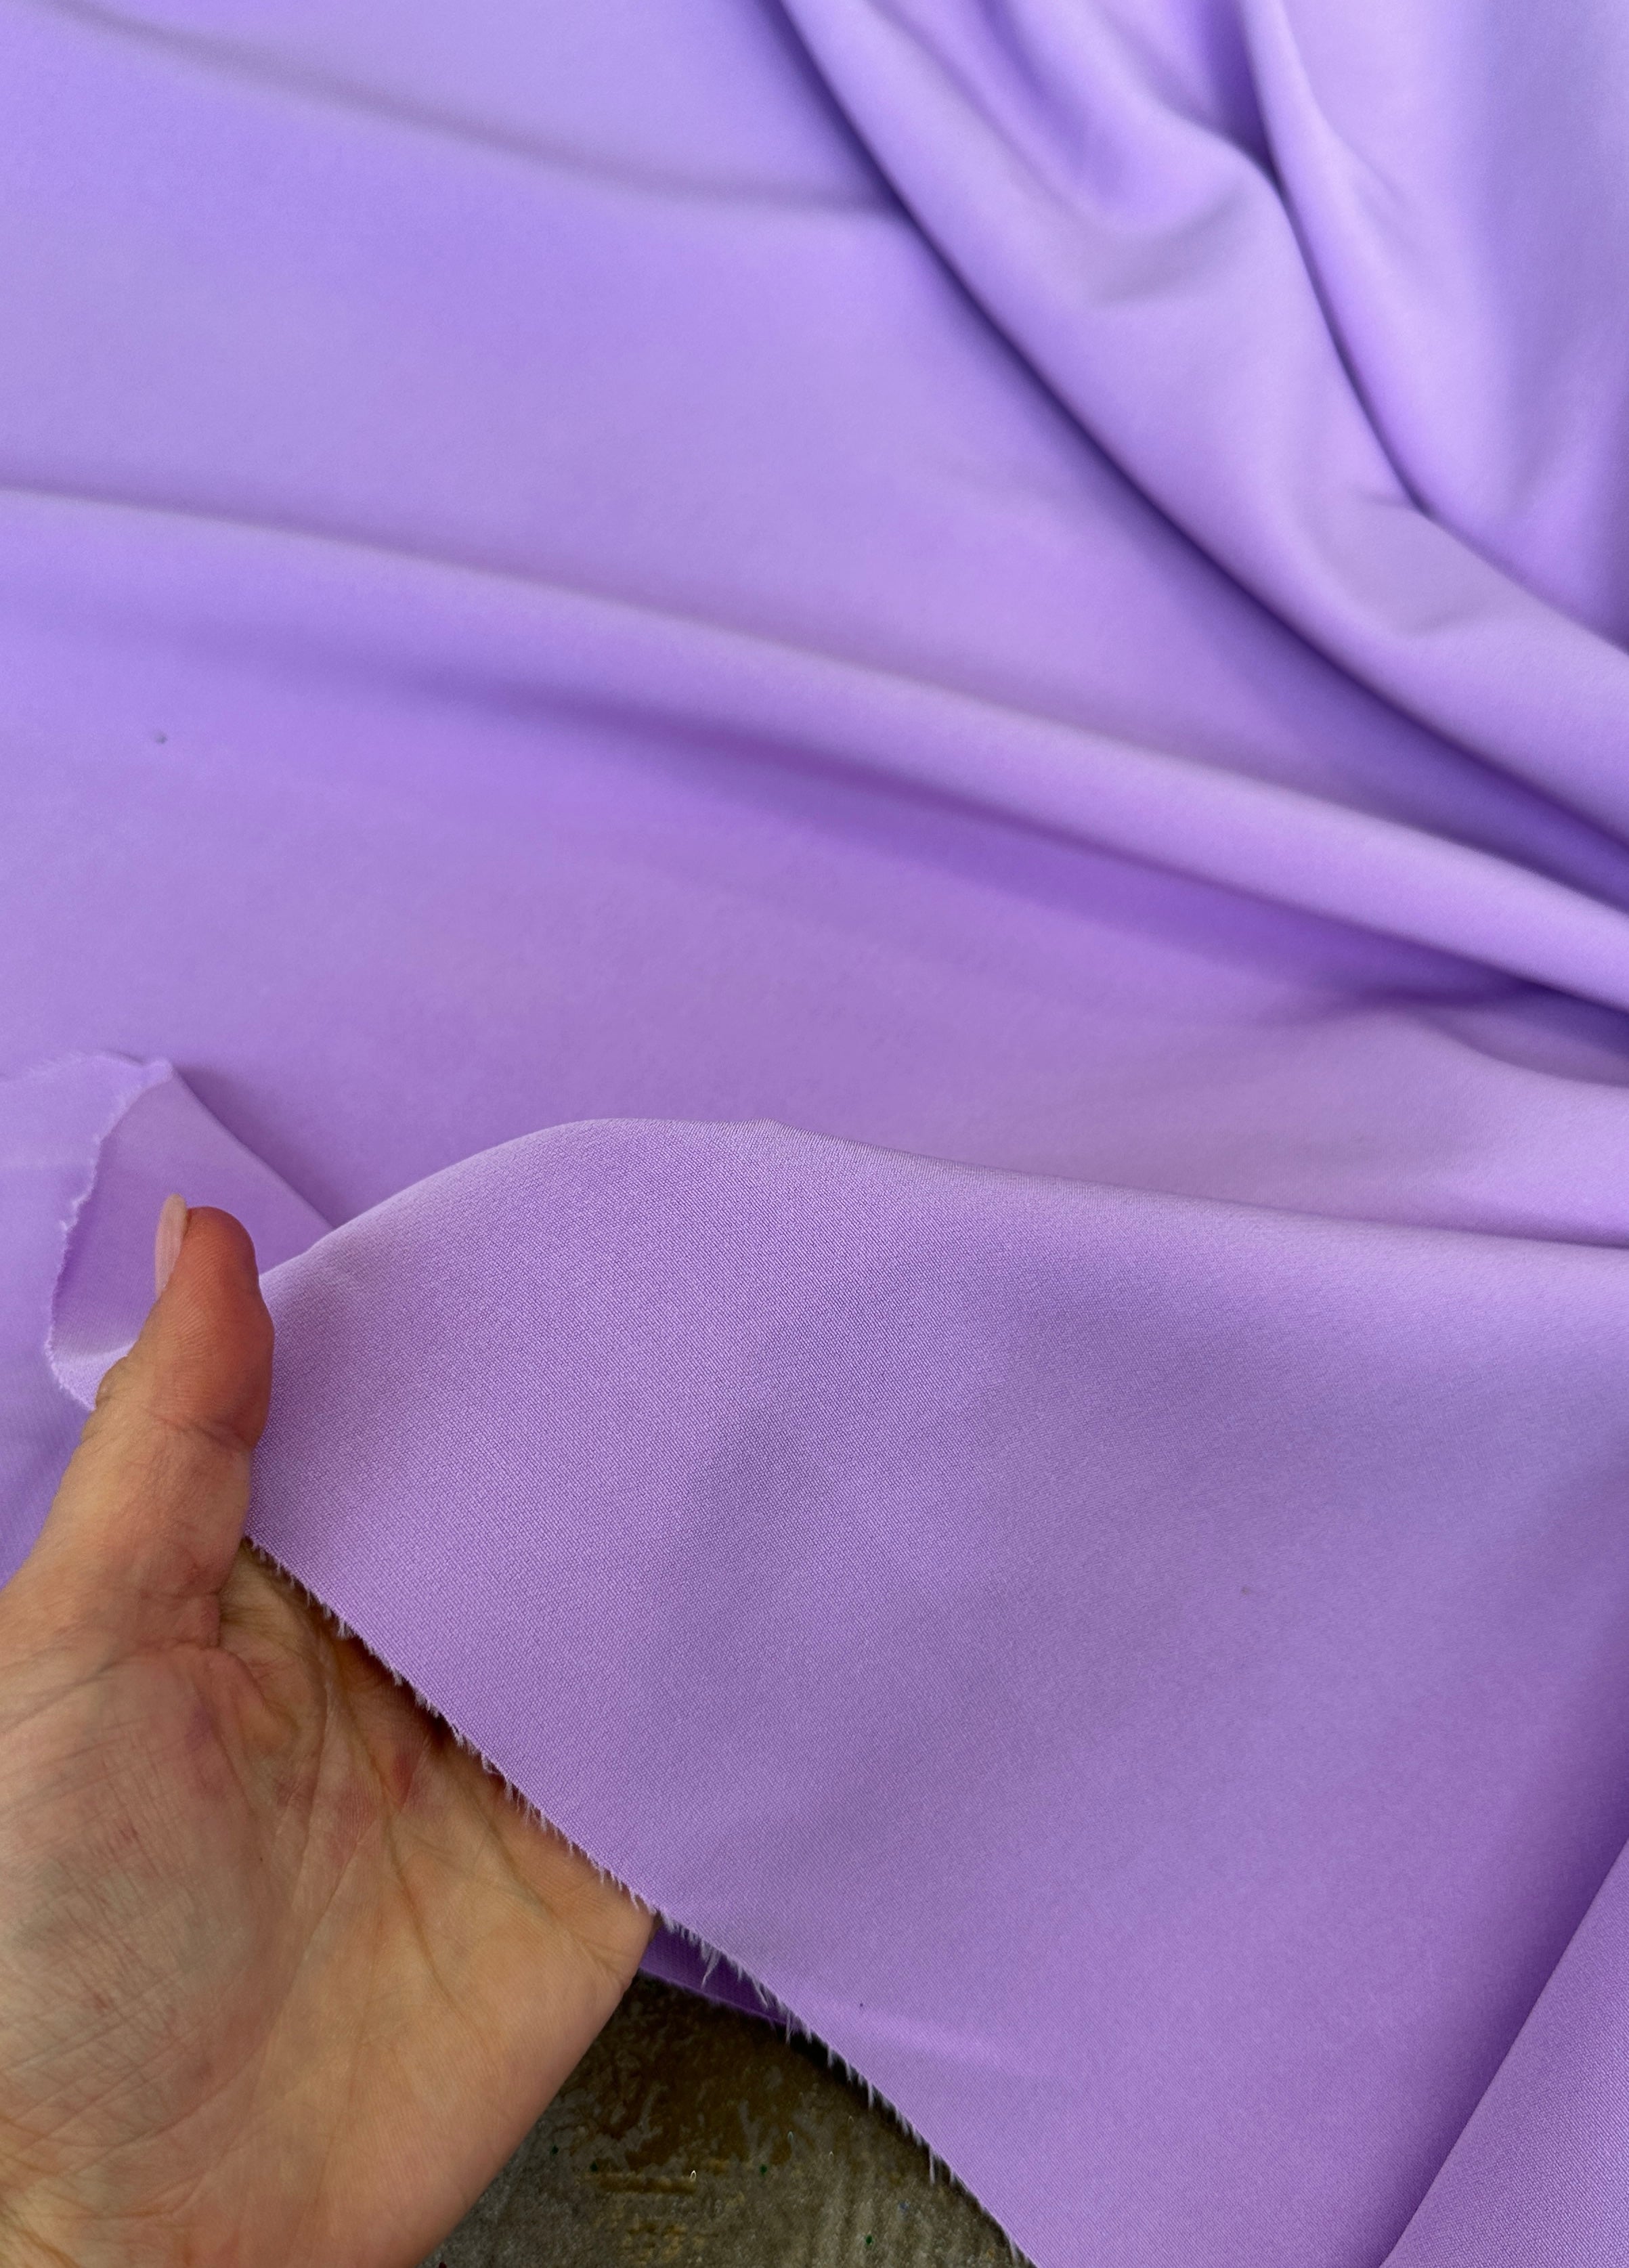 lavender stretch crepe, lavender color fabric, purple color fabric, purple dress for woman, light purple dress, best lavender color, fabric for woman, purple bridal dress, stretch bridal dress, cheap fabric, discounted fabric, buy fabric for woman online, luxury dress for woman, viscose crepe, crepe clothing material, wedding crepe, opac fabric, stretch crepe back satin